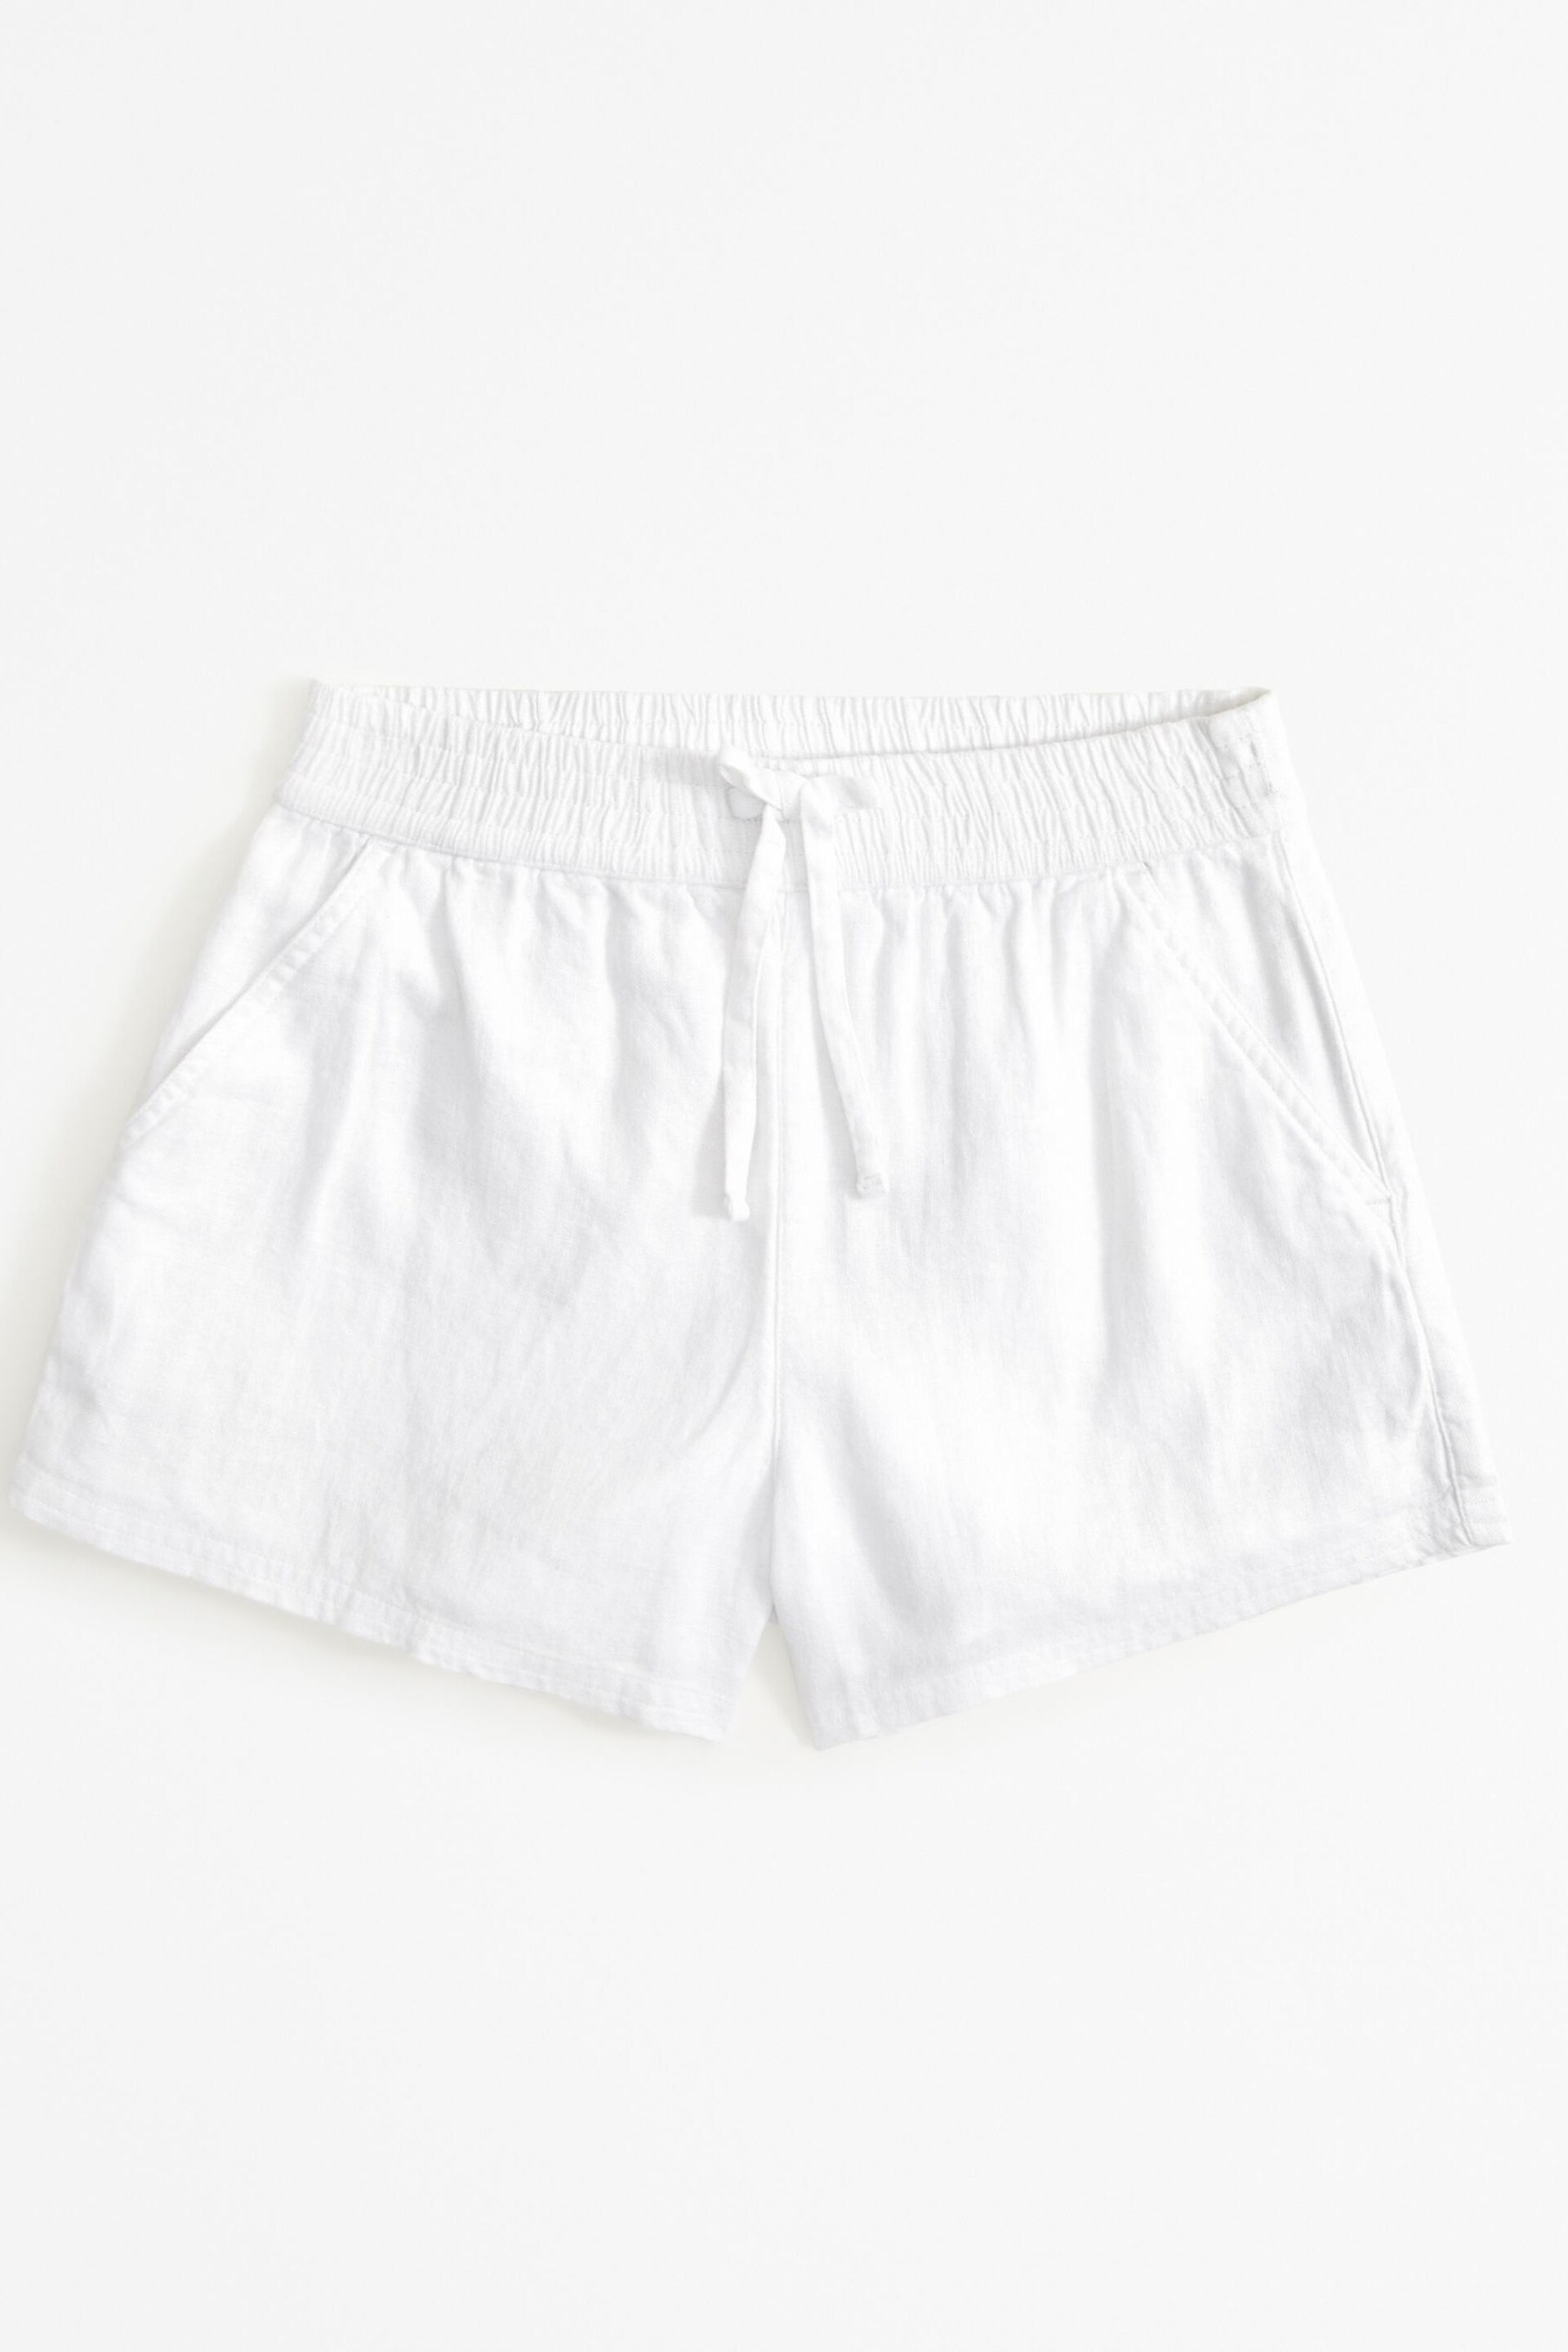 Abercrombie & Fitch Elasticated Waist Linen White Shorts - Image 1 of 1